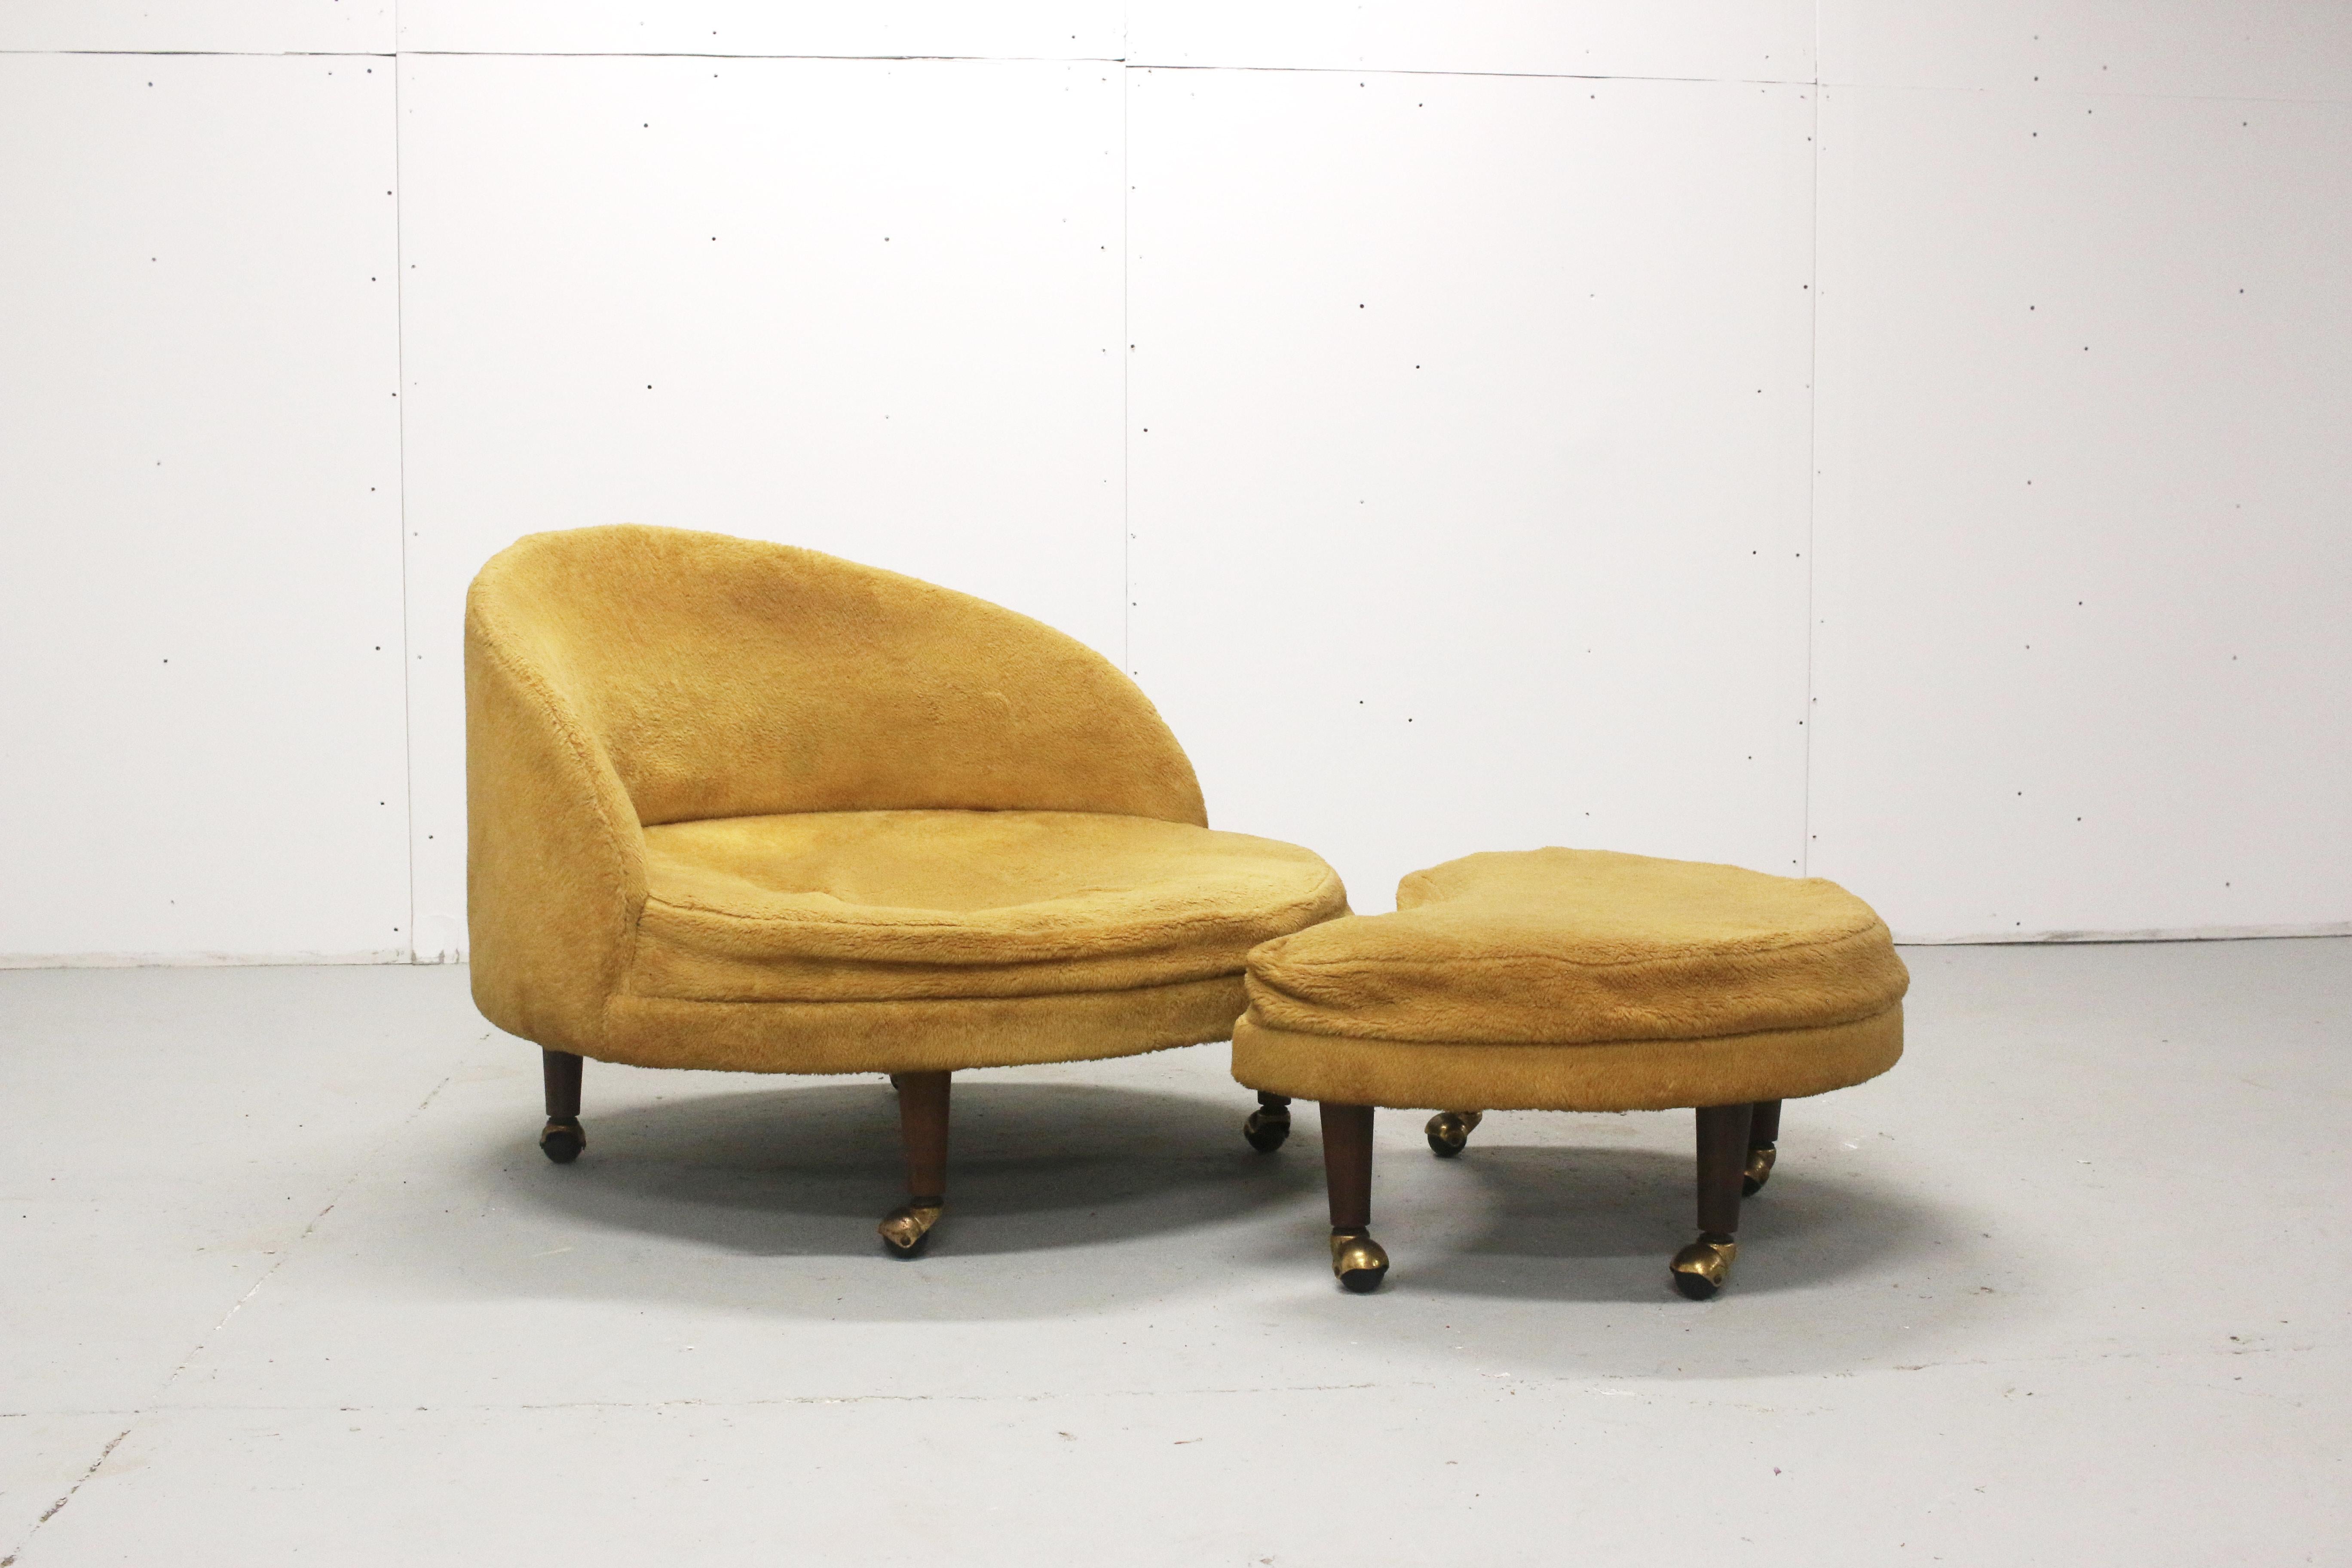 Rare Adrian Pearsall round Havana chair with ottoman, 1960s, for re-upholstery.

Measures: 37” diameter, 28 1/4” tall
33” seat depth & width, 13” seat height
 ottoman is 29 1/2” wide, 19” deep, 13” tall.


 